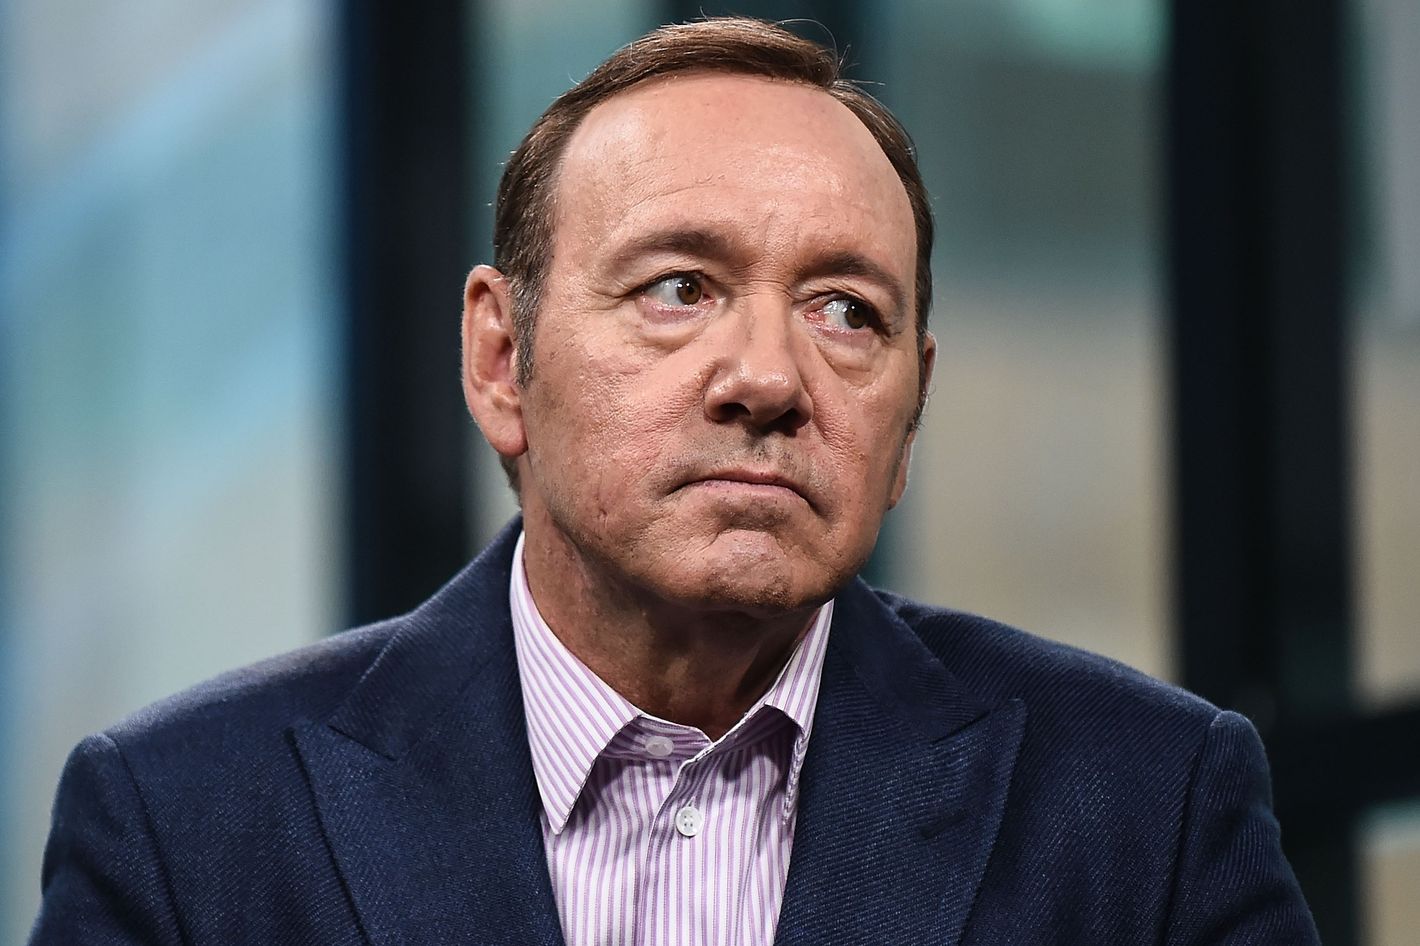 Kevin Spacey Man Alleges Sexual Relationship at 14 photo pic